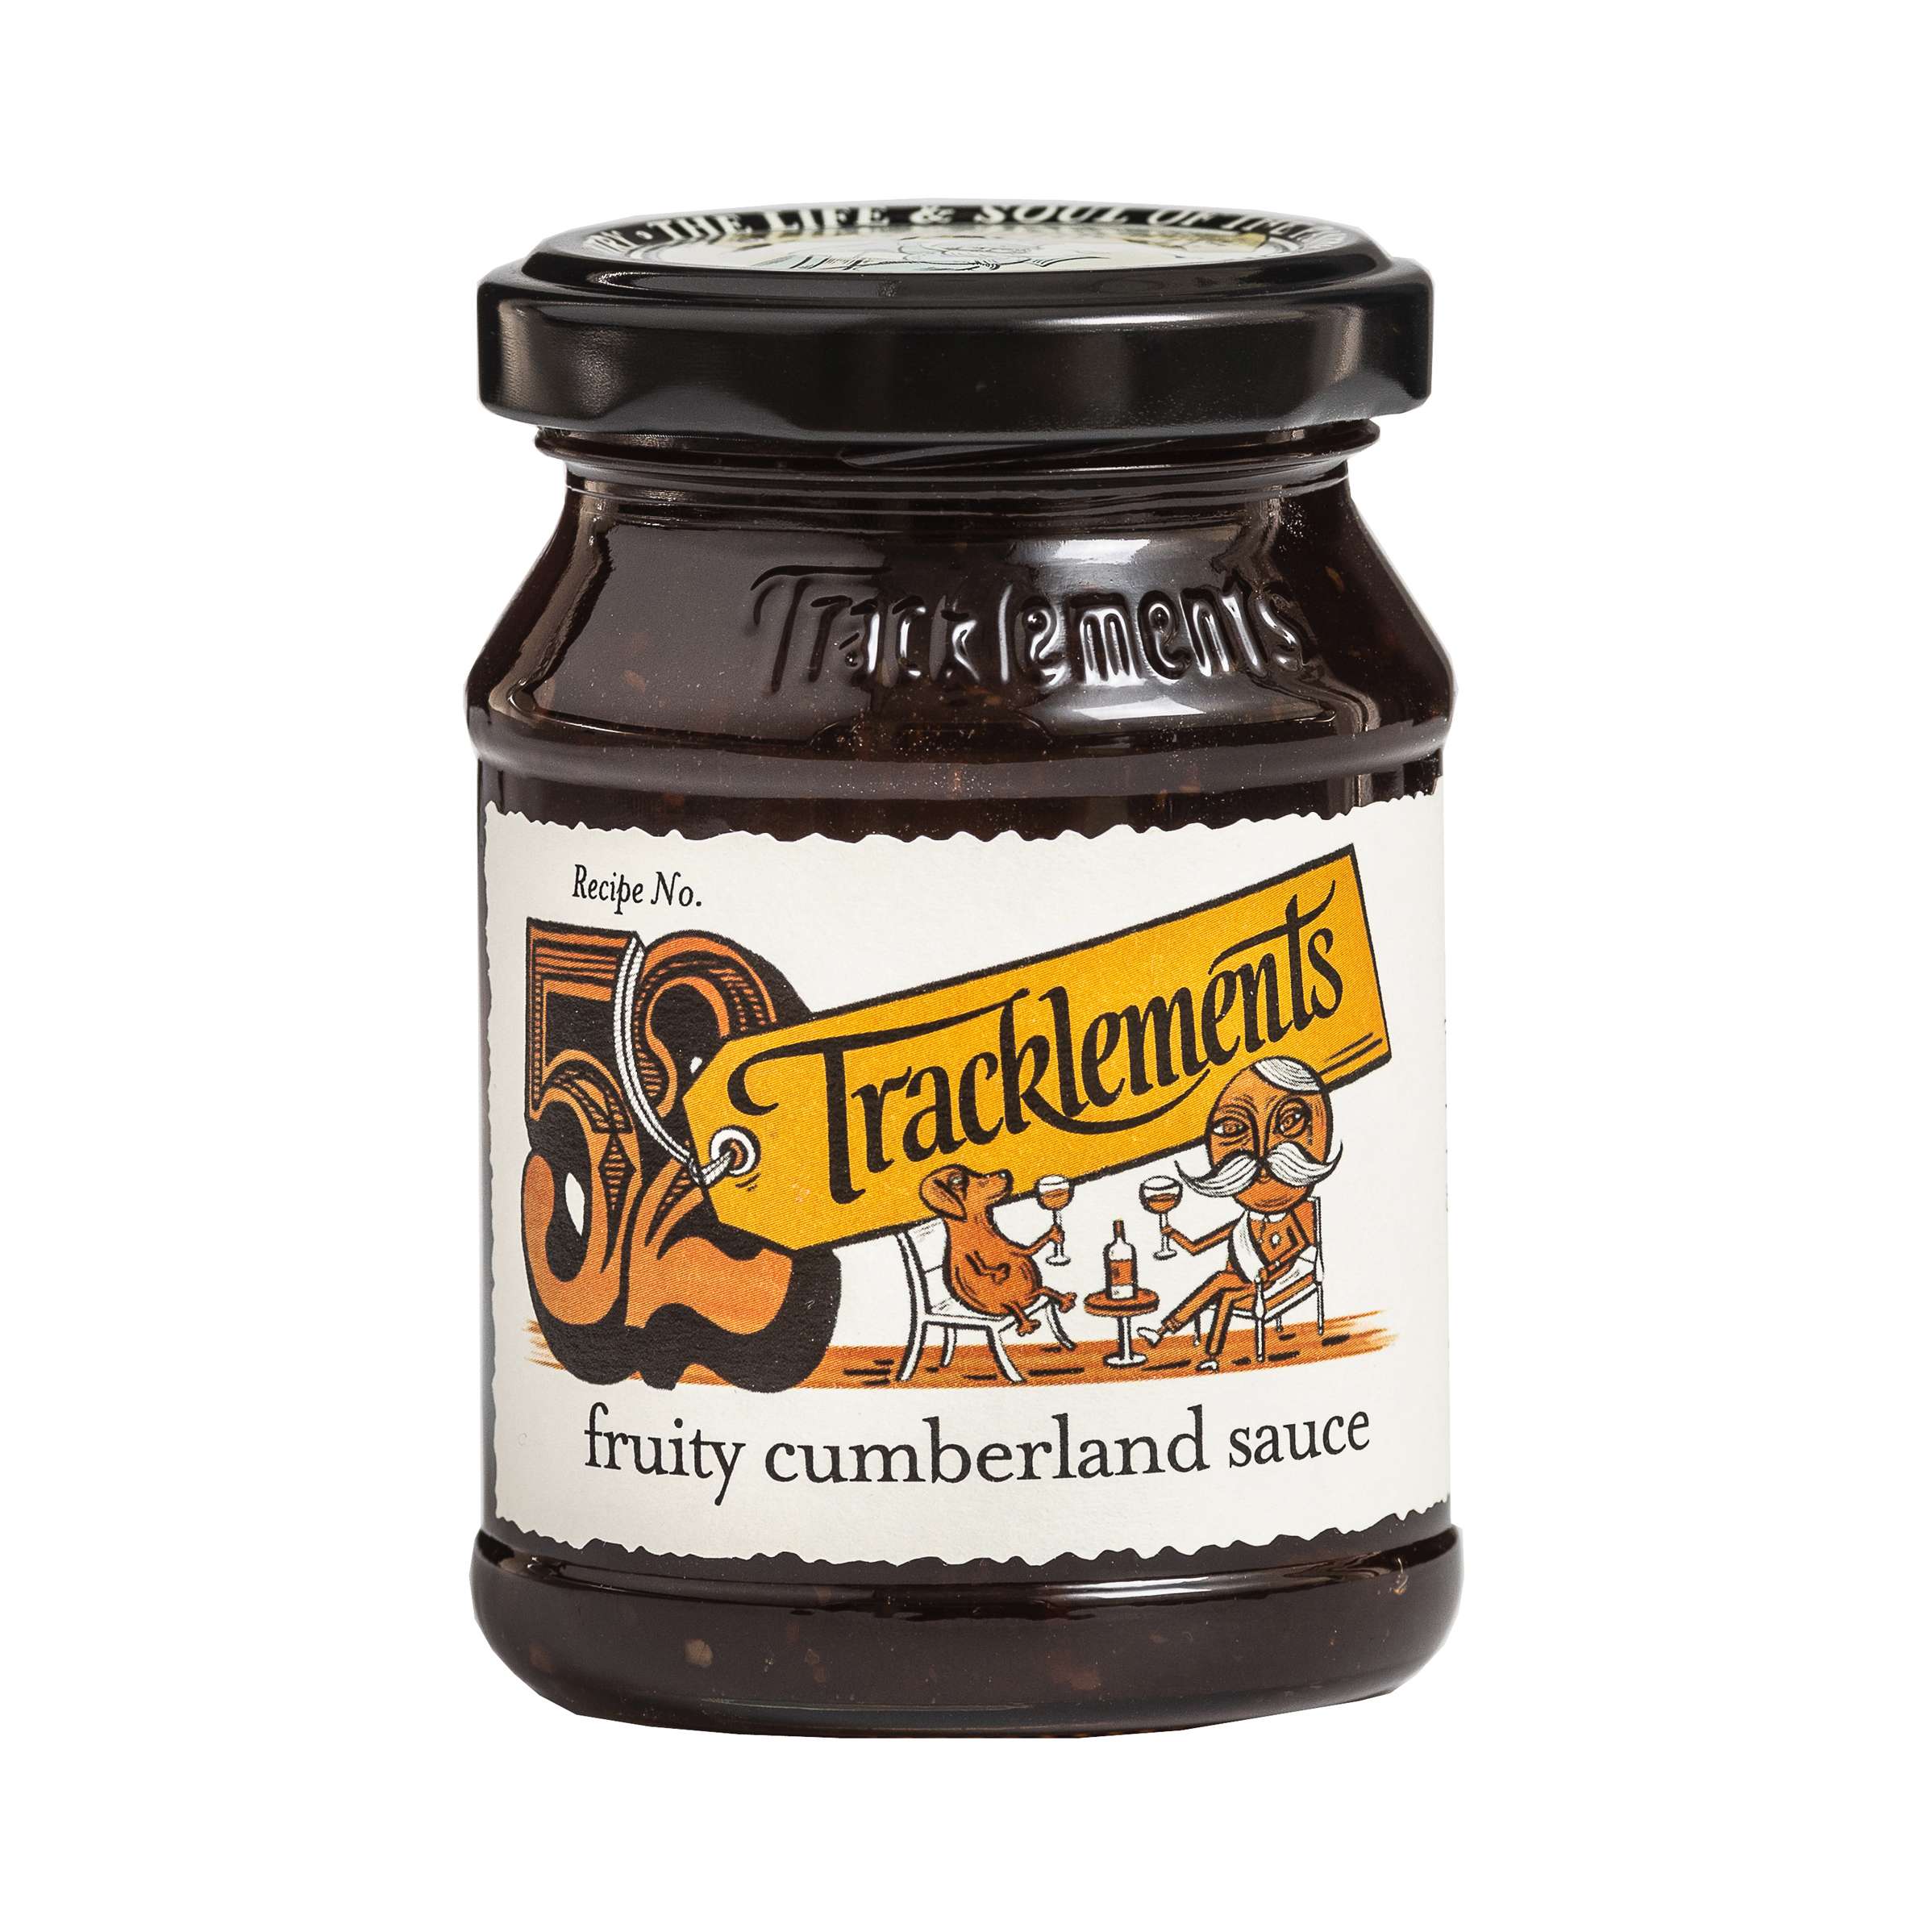 Tracklements Fruity Cumberland Sauce